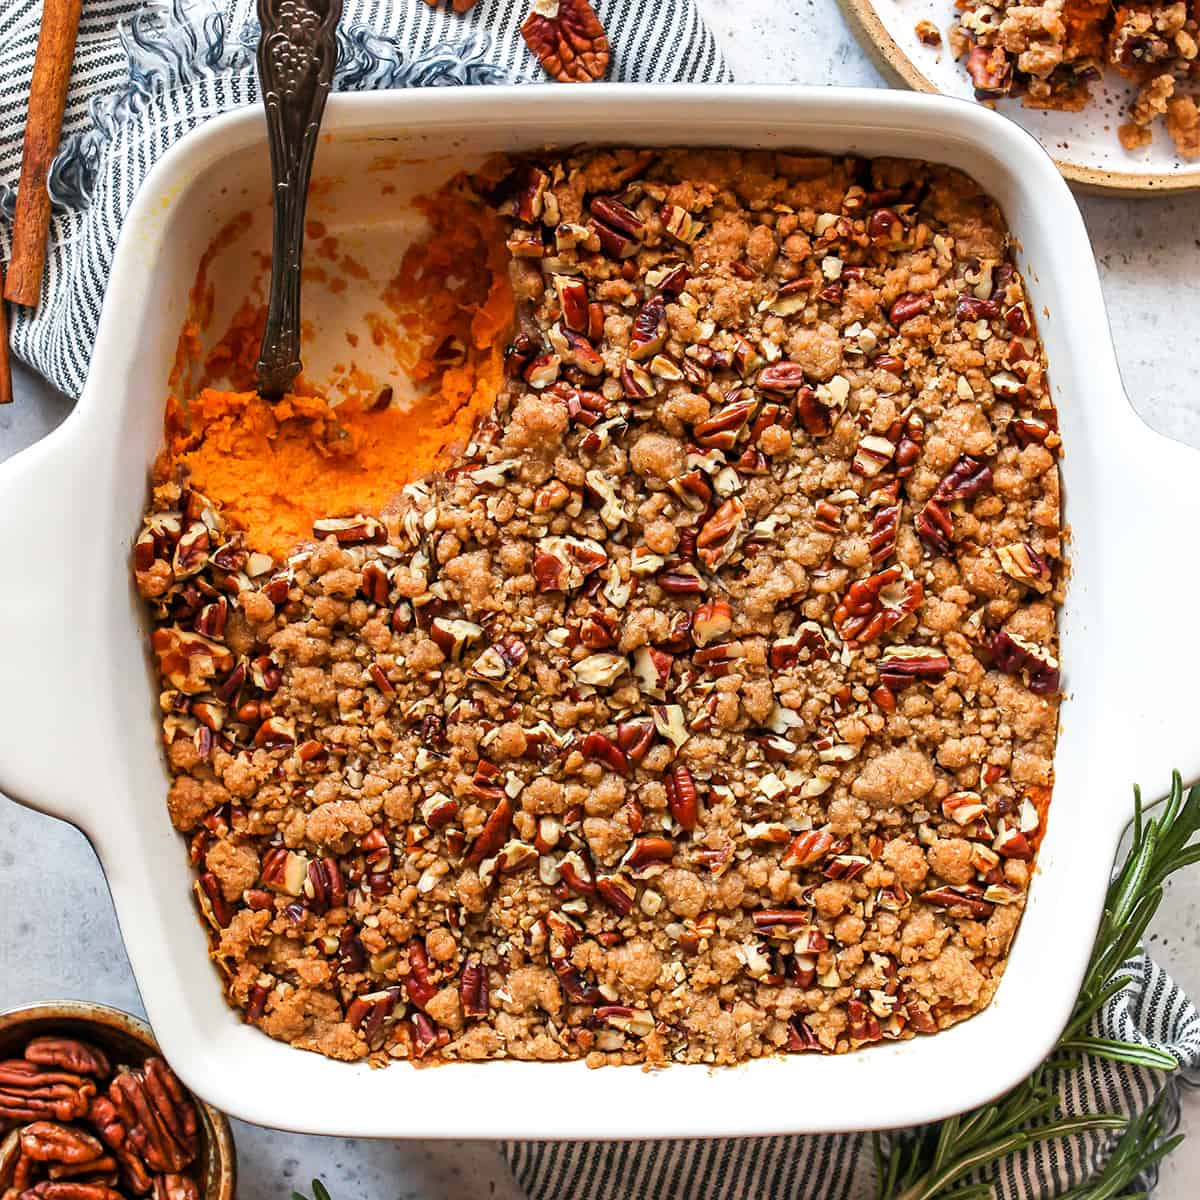 Best Sweet Potato Casserole Recipe in a baking dish with a serving spoon